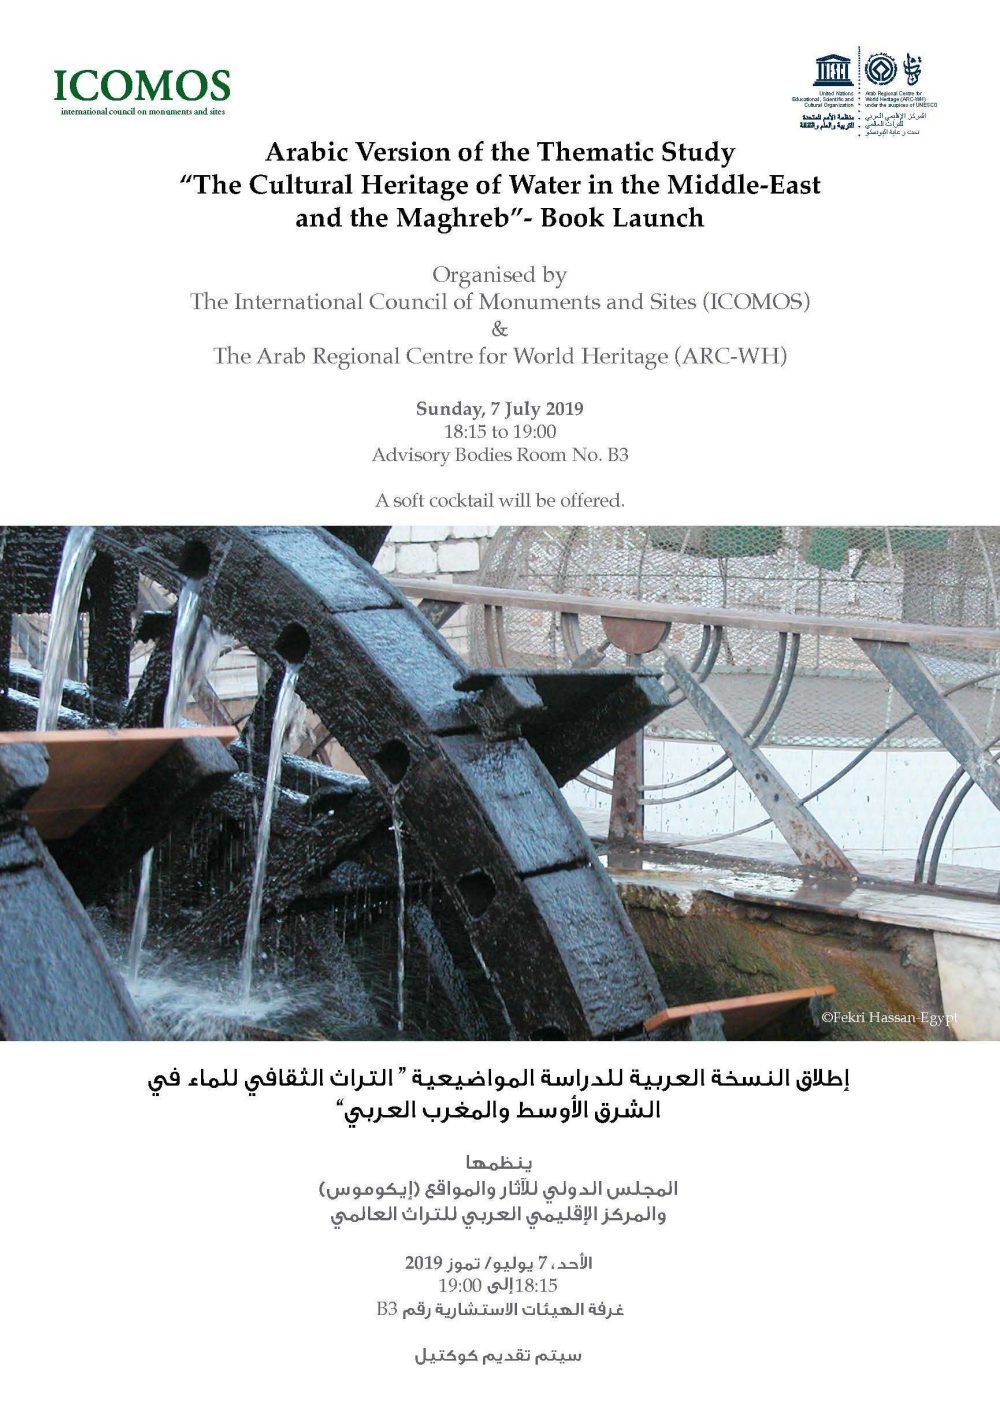 Launch of Arabic Version of the Thematic Study “The Cultural Heritage of Water in the Middle-East and Maghreb”